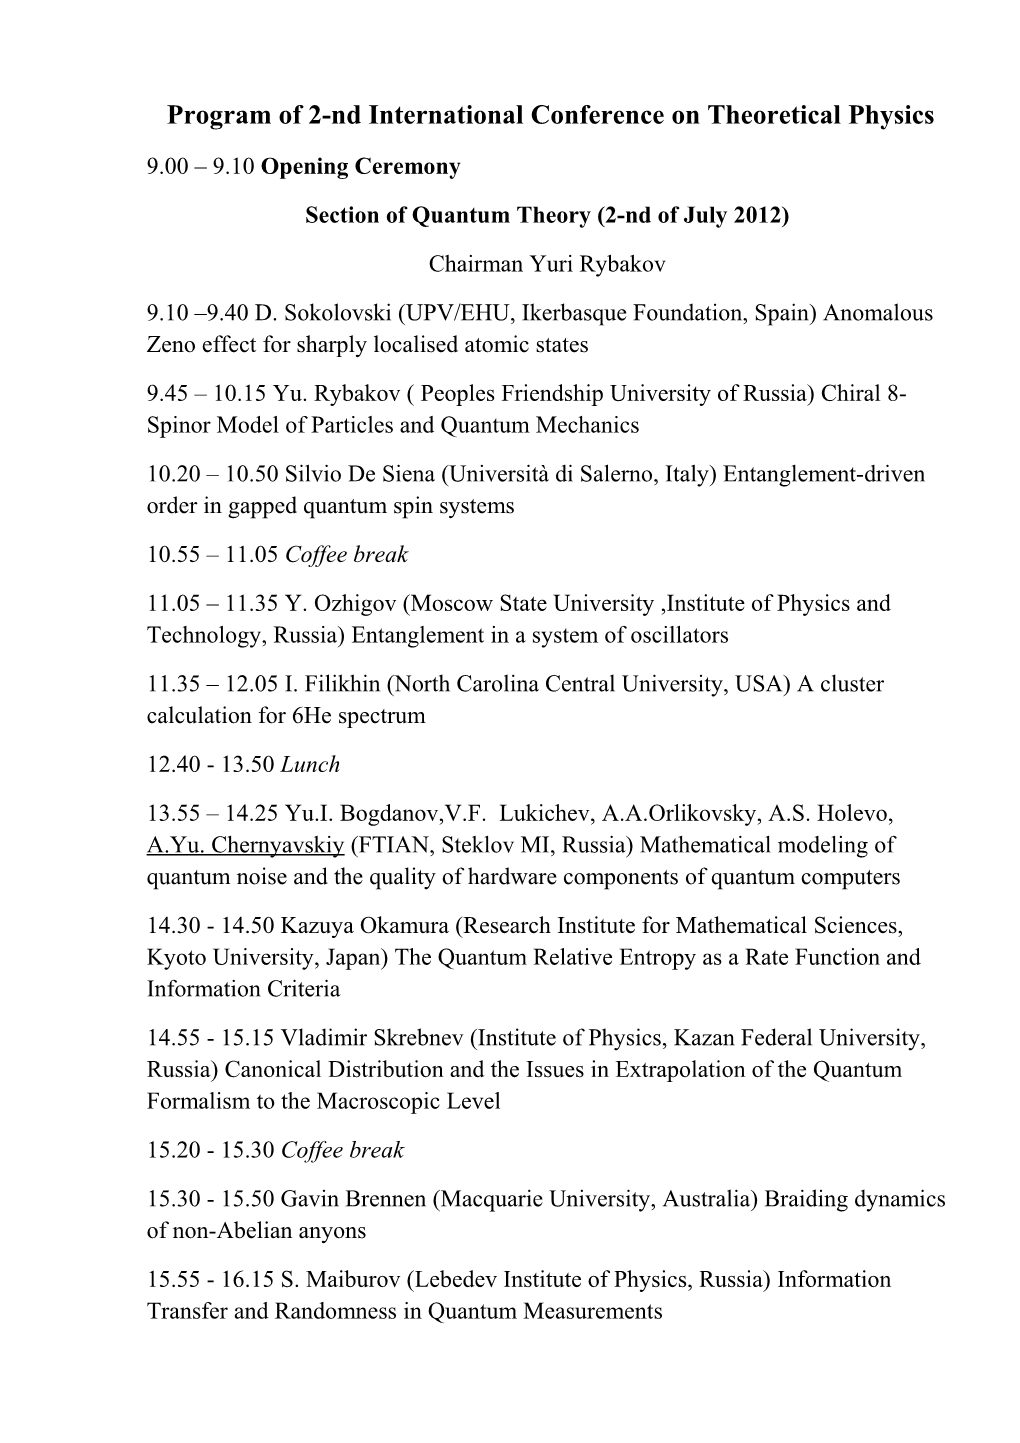 Program of 2-Nd International Conference on Theoretical Physics